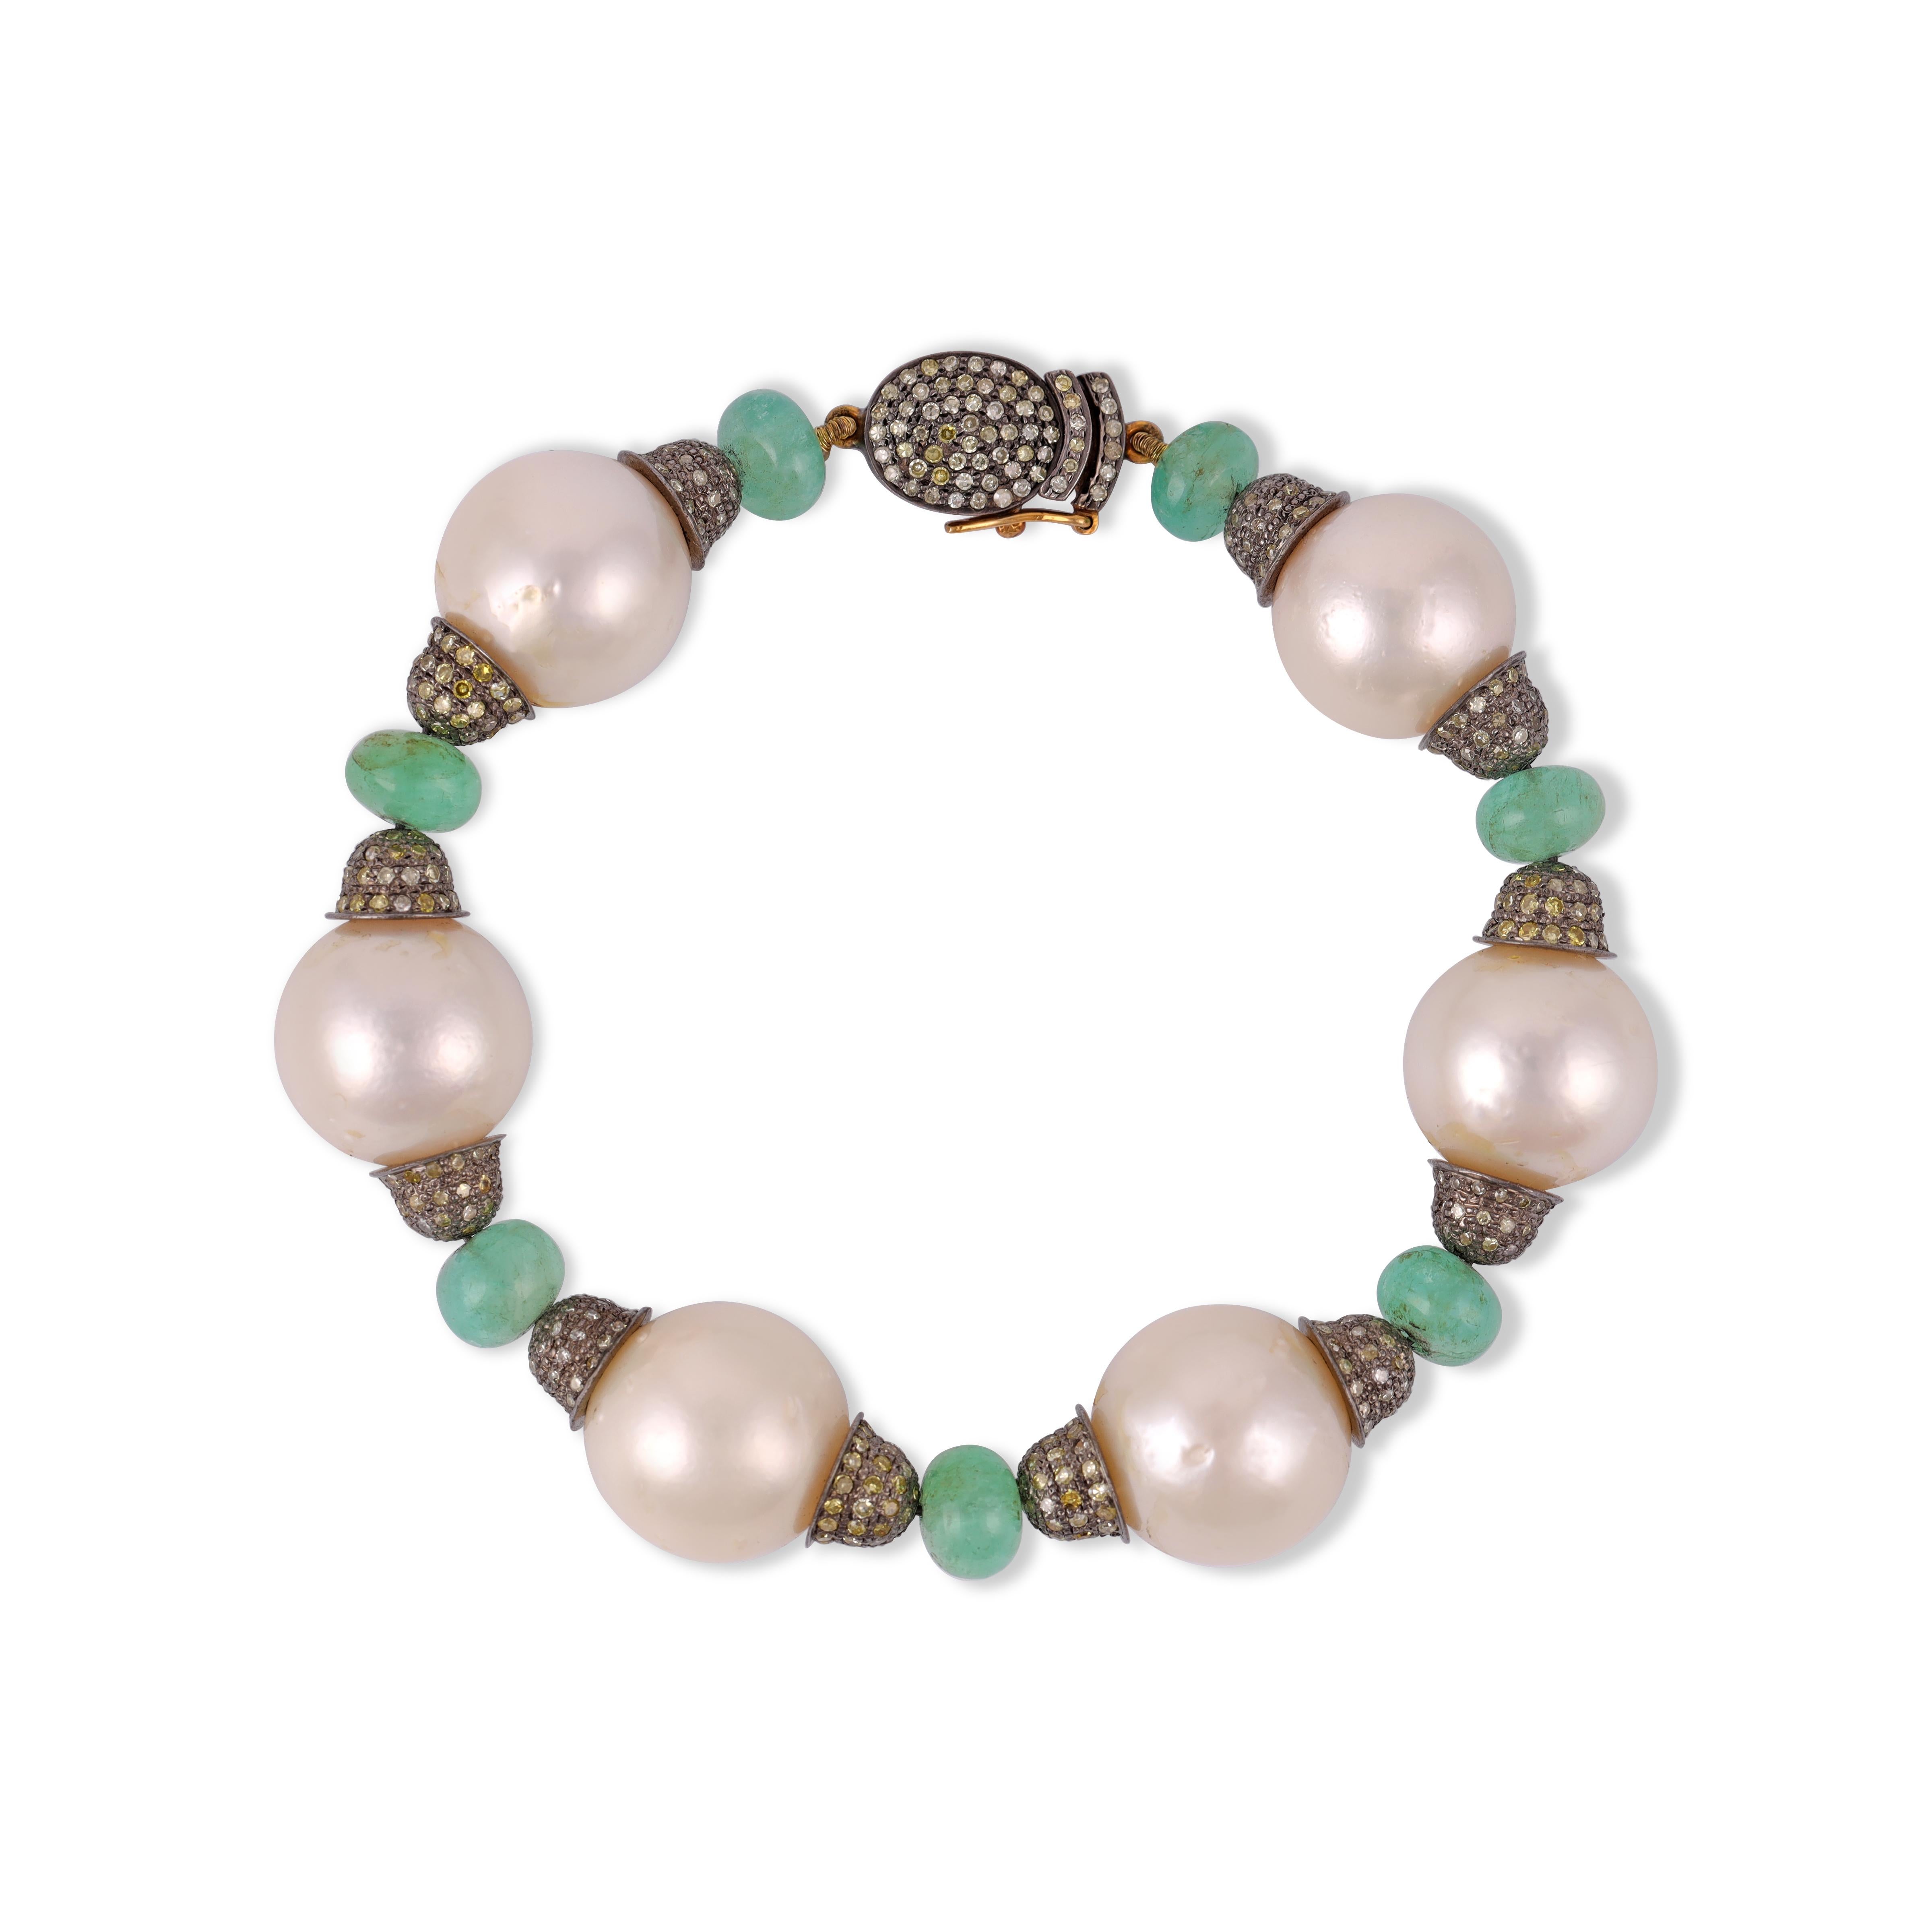 Magnificent Antique Pearl Diamond Emerald and Silver Upon Gold Bracelet
Pearl 118.41  Carat
Emerald 14.67  Carat
Diamond 2.84  Carat

Gold 0.61 gm
silver 8.77 gm 


Custom Services
Resizing is available.
Request Customization

